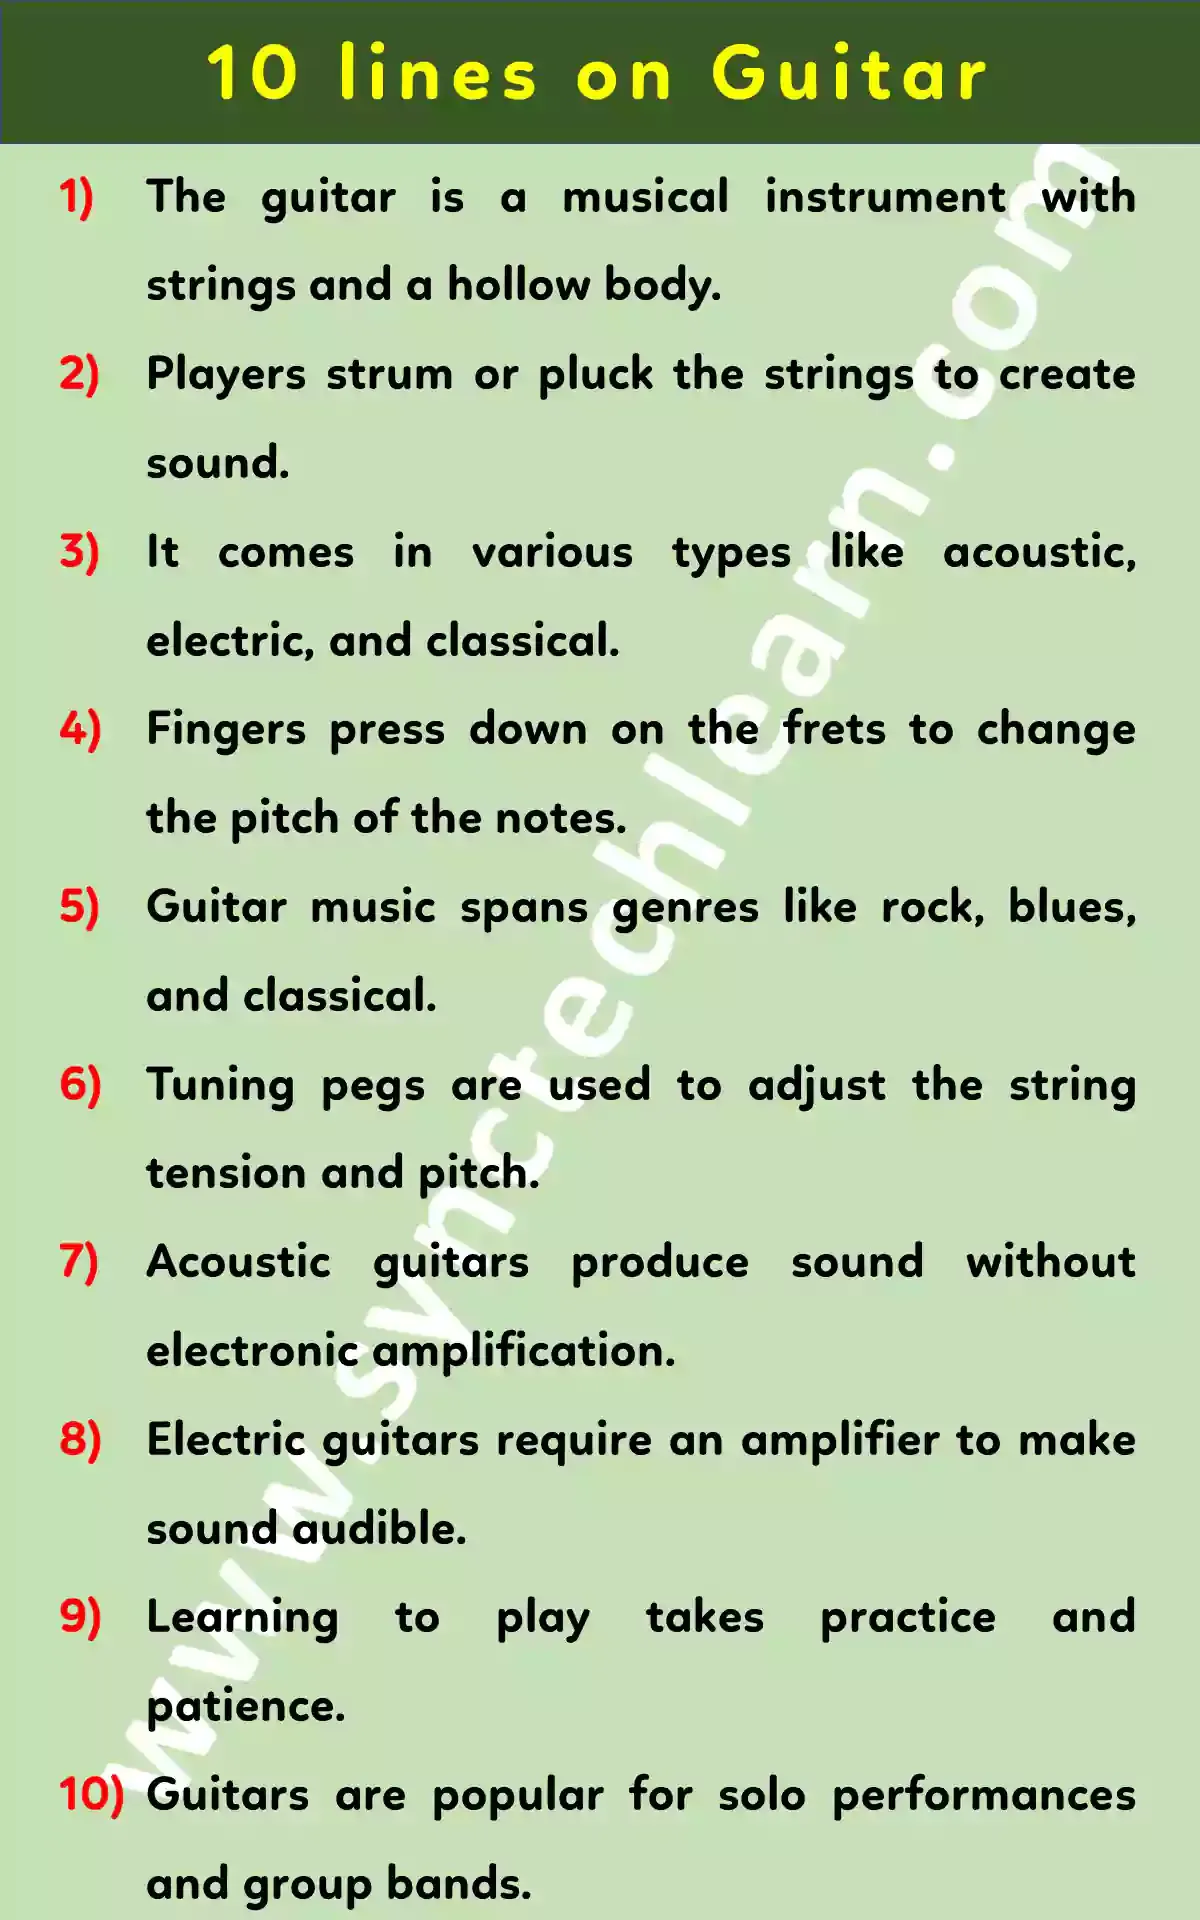 10 lines about Guitar